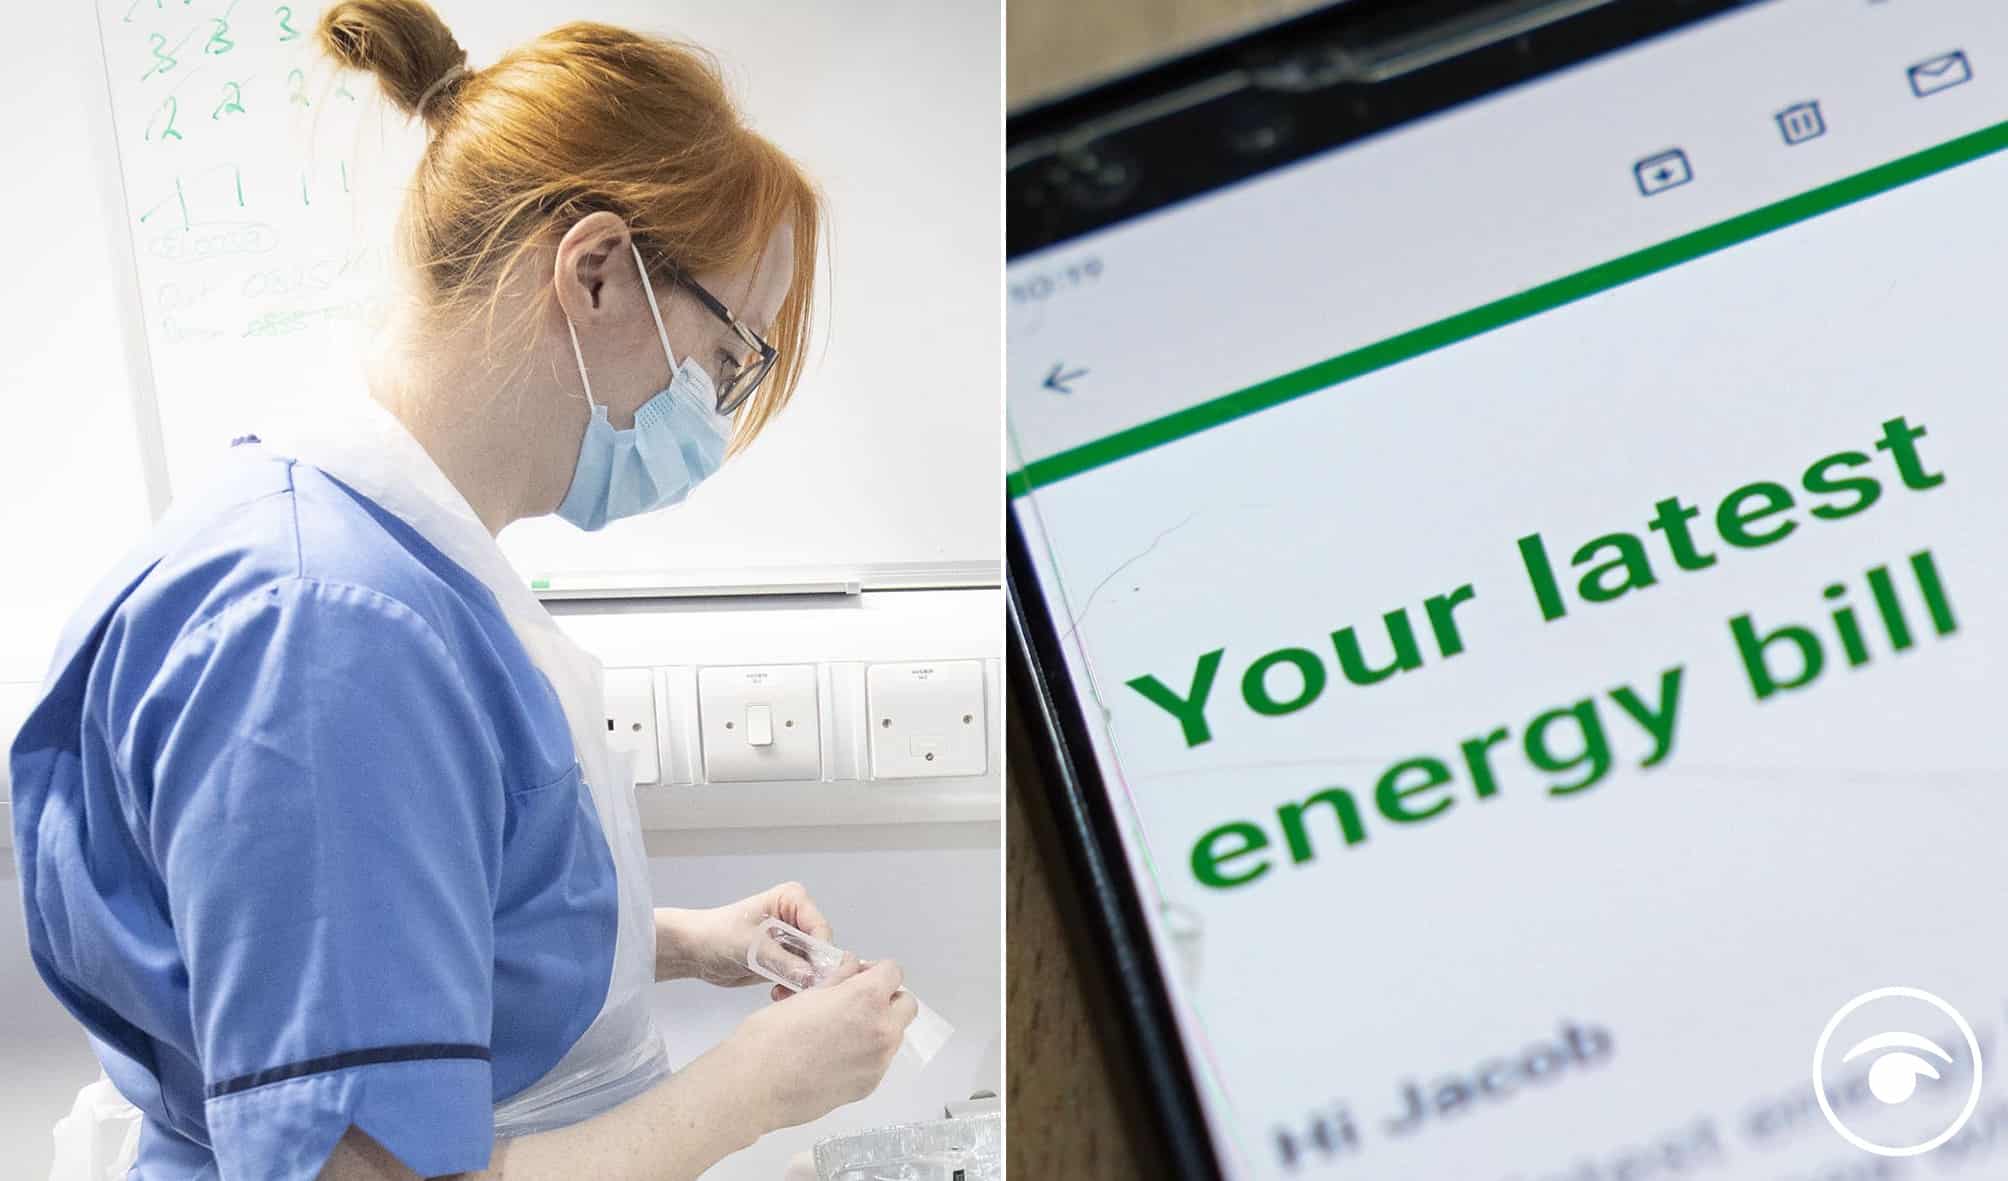 Huge Oct energy price cap rise as nurses already relying on food banks and unable to pay rent